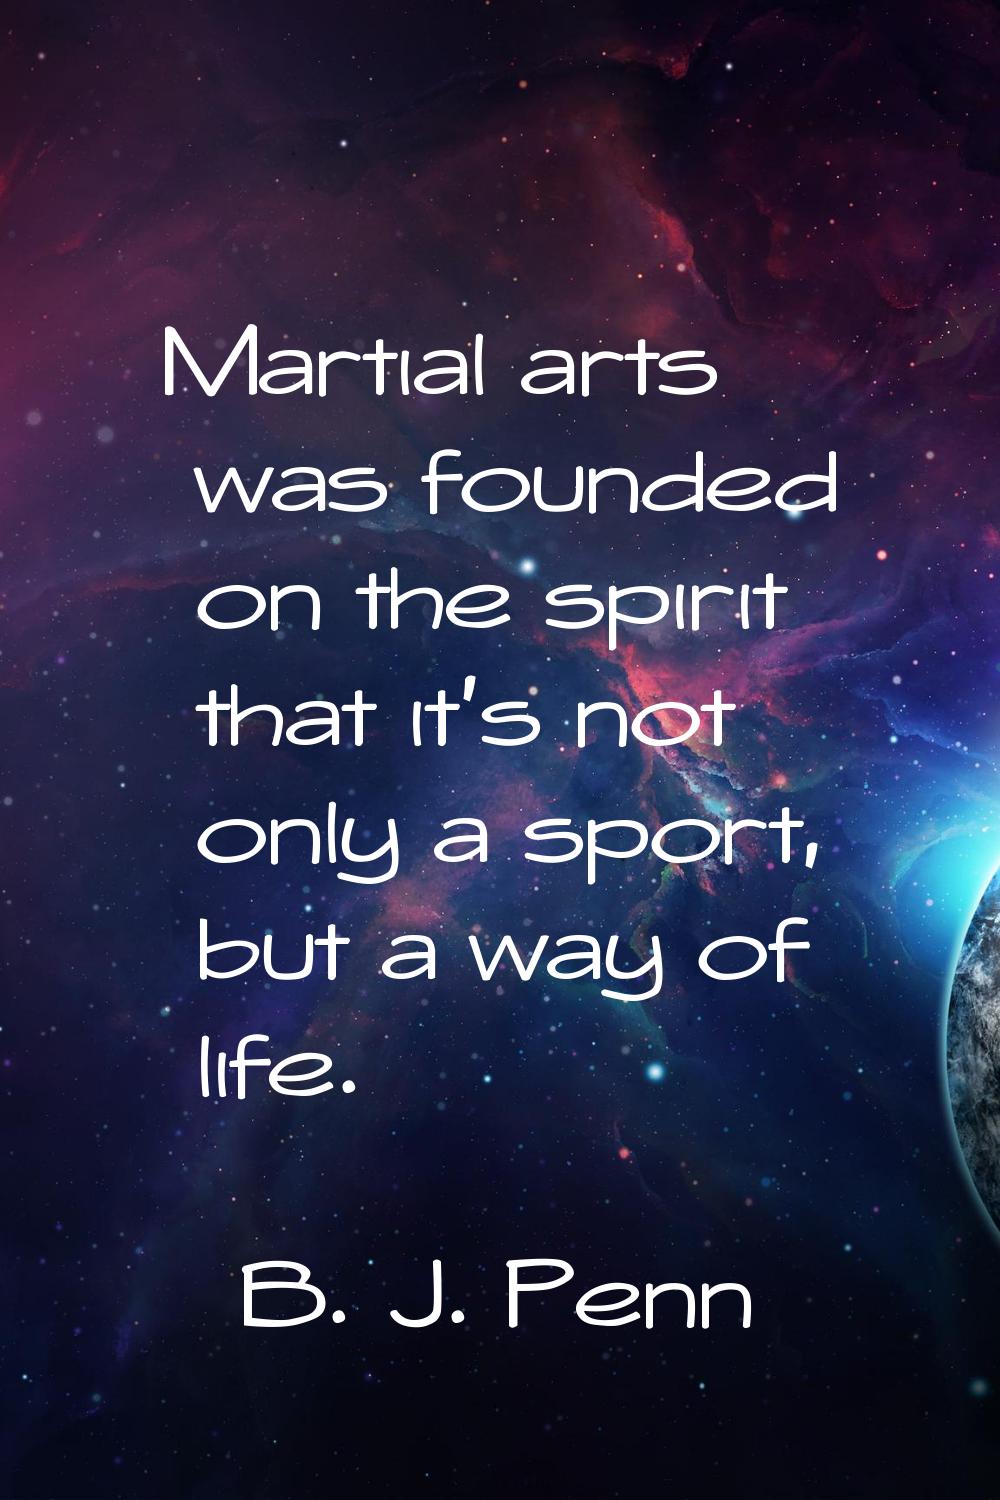 Martial arts was founded on the spirit that it's not only a sport, but a way of life.